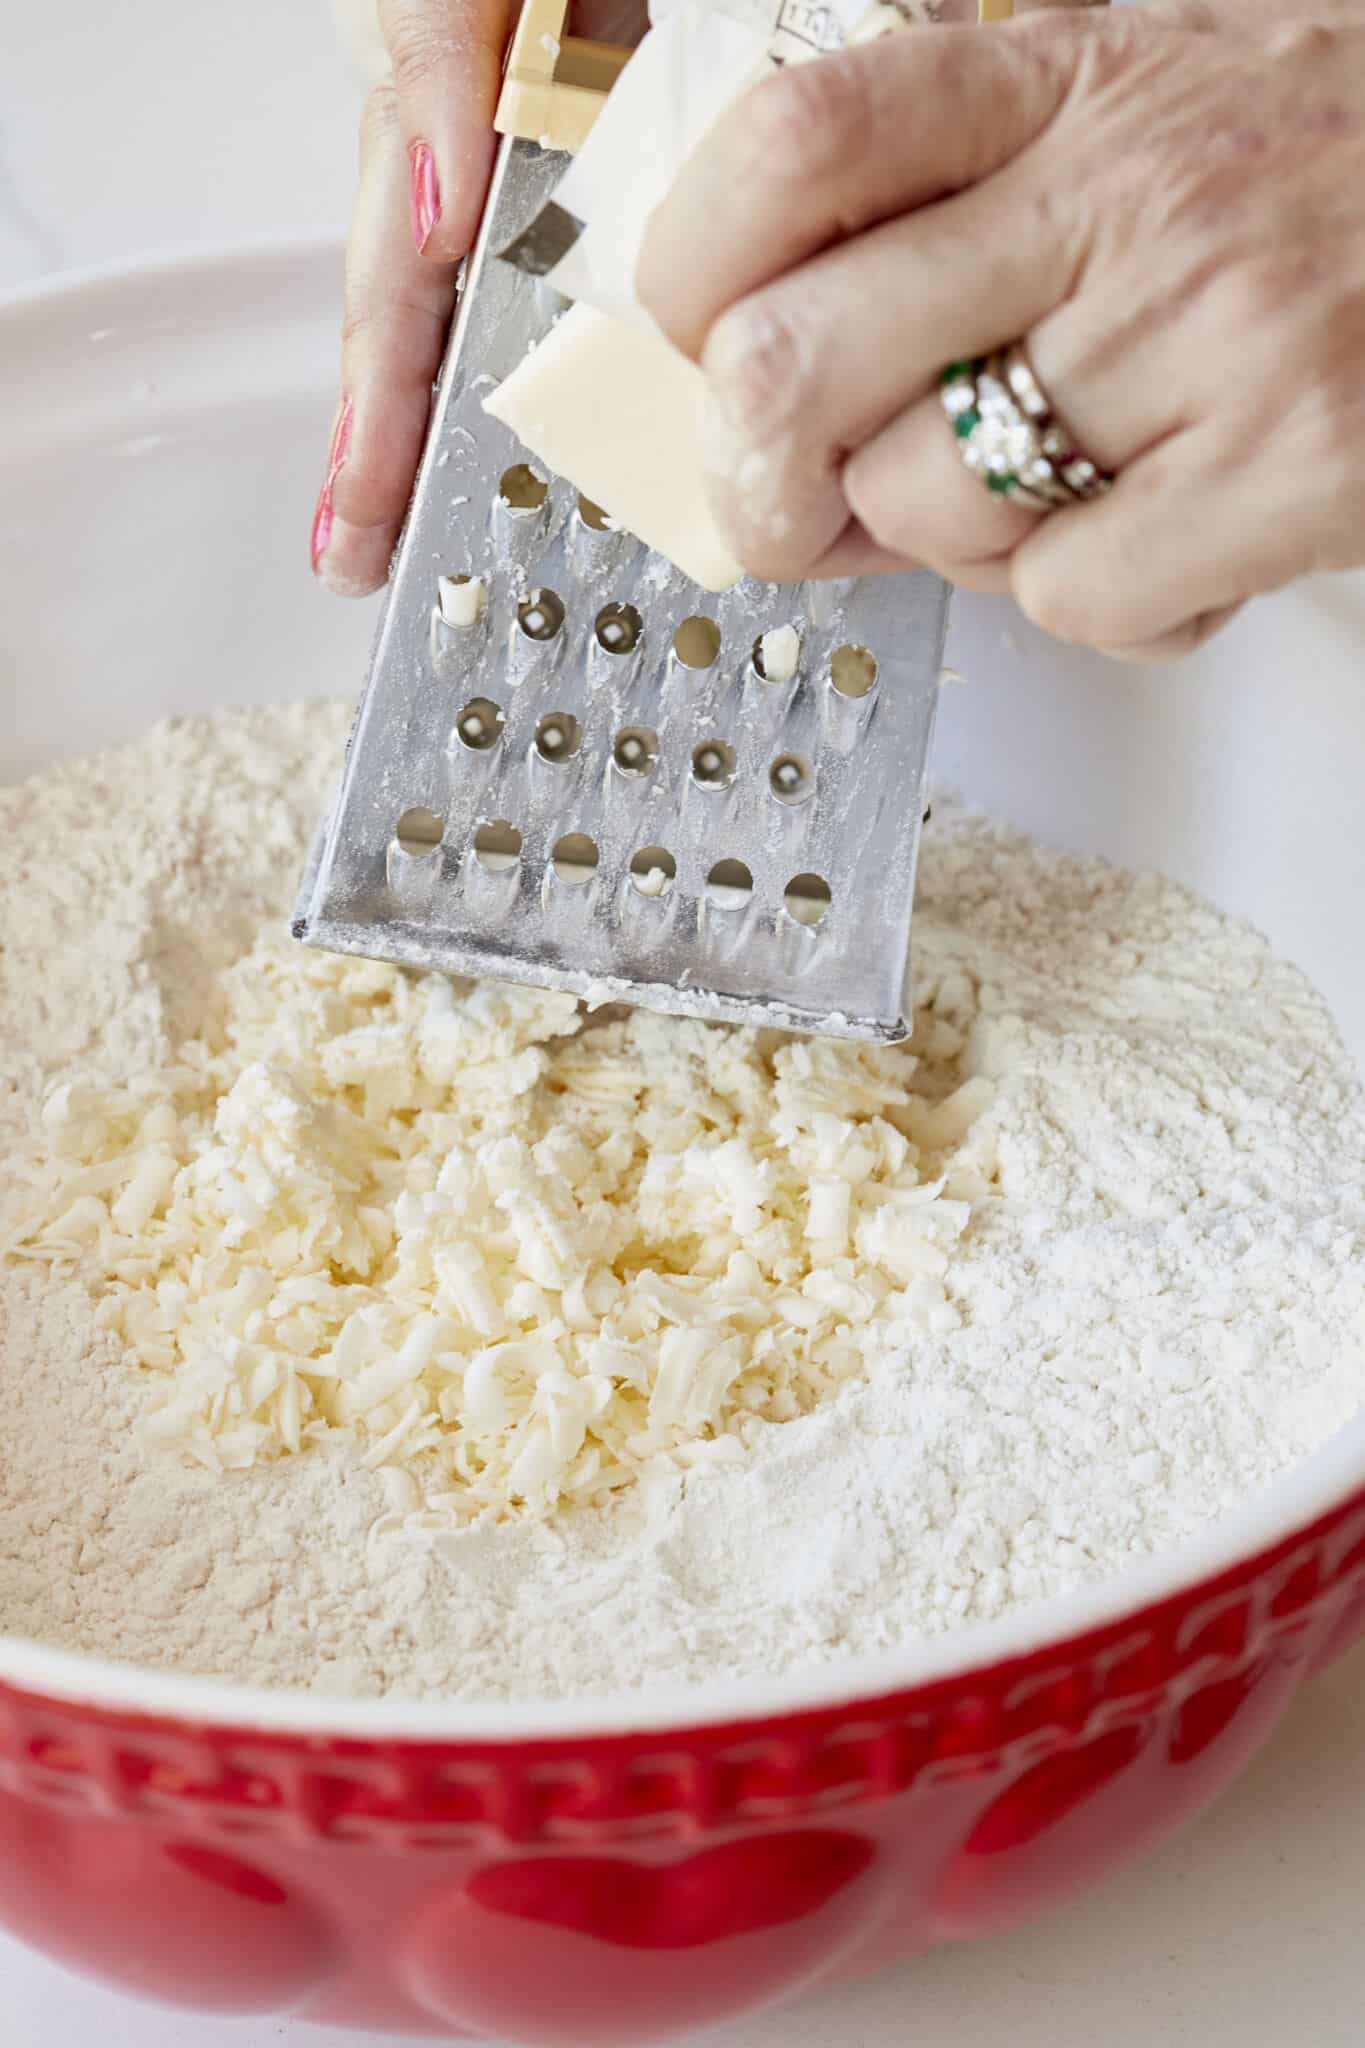 Step-by-step instructions on how to make scones. Grating frozen butter into the flour mixture. 